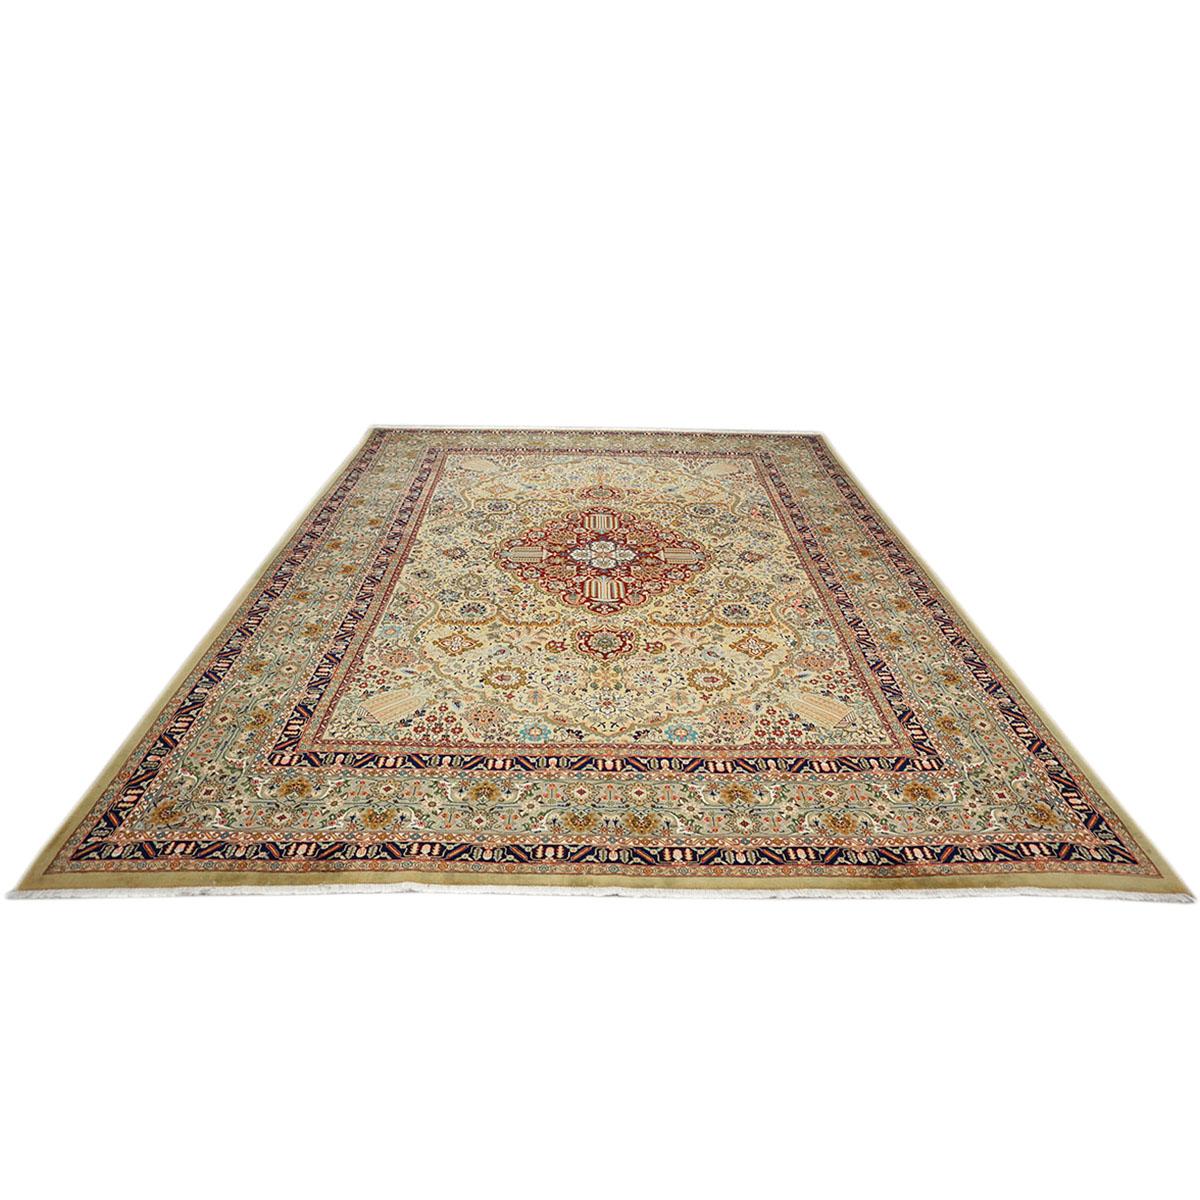 Ashly fine rugs presents a 1930s Antique Persian Tabriz. Tabriz is a northern city in modern-day Iran and has forever been famous for the fineness and craftsmanship of its handmade rugs. This piece has a light tan-colored background and a light gold